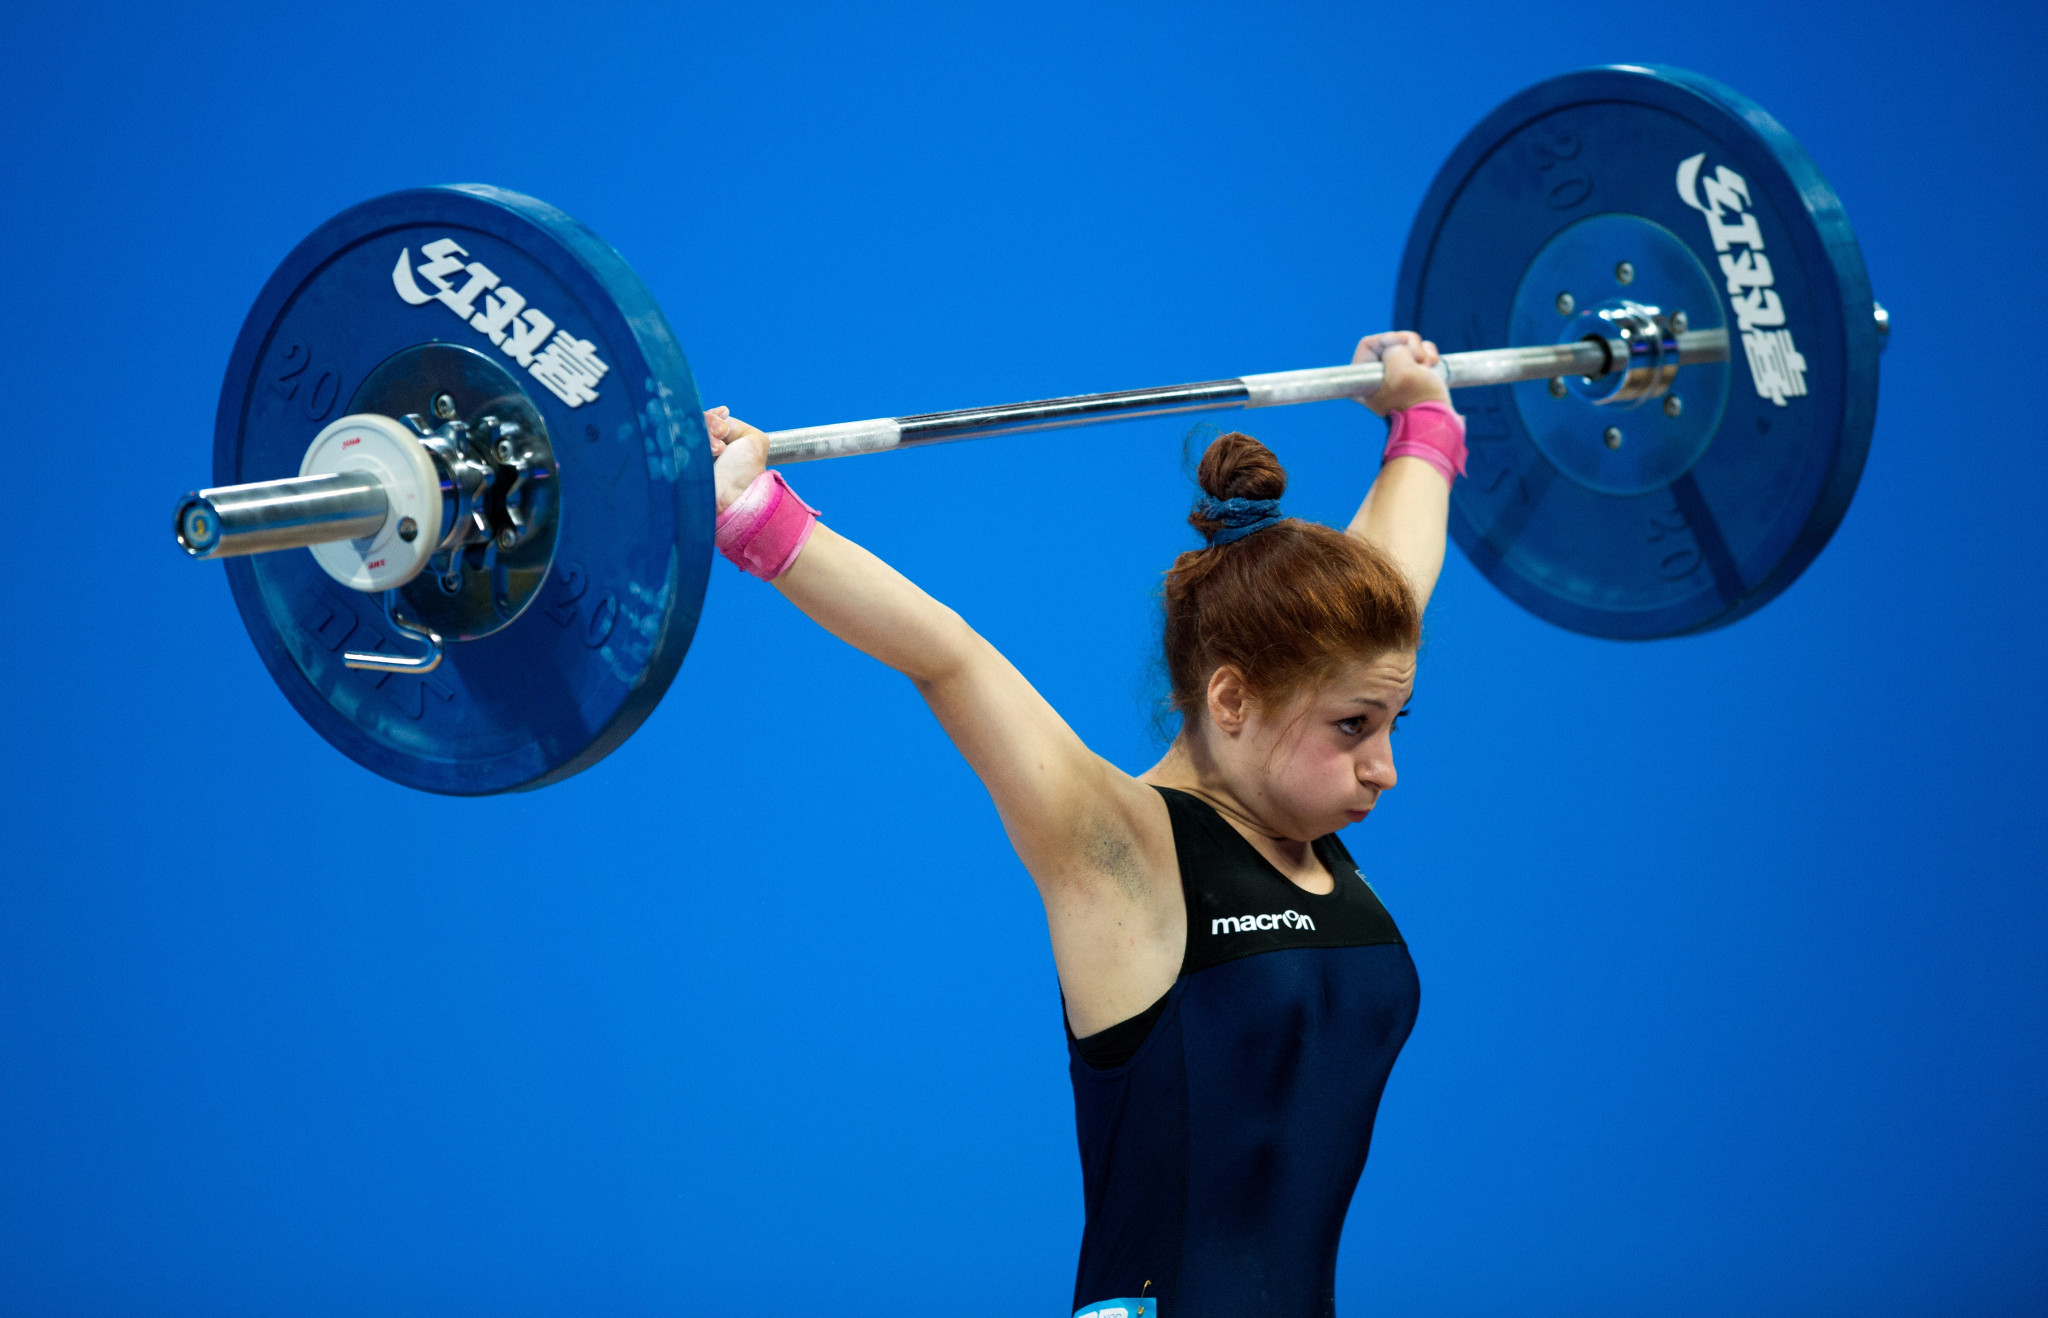 Alessandra Pagliaro was the best in both the snatch and clean and jerk ©Getty Images